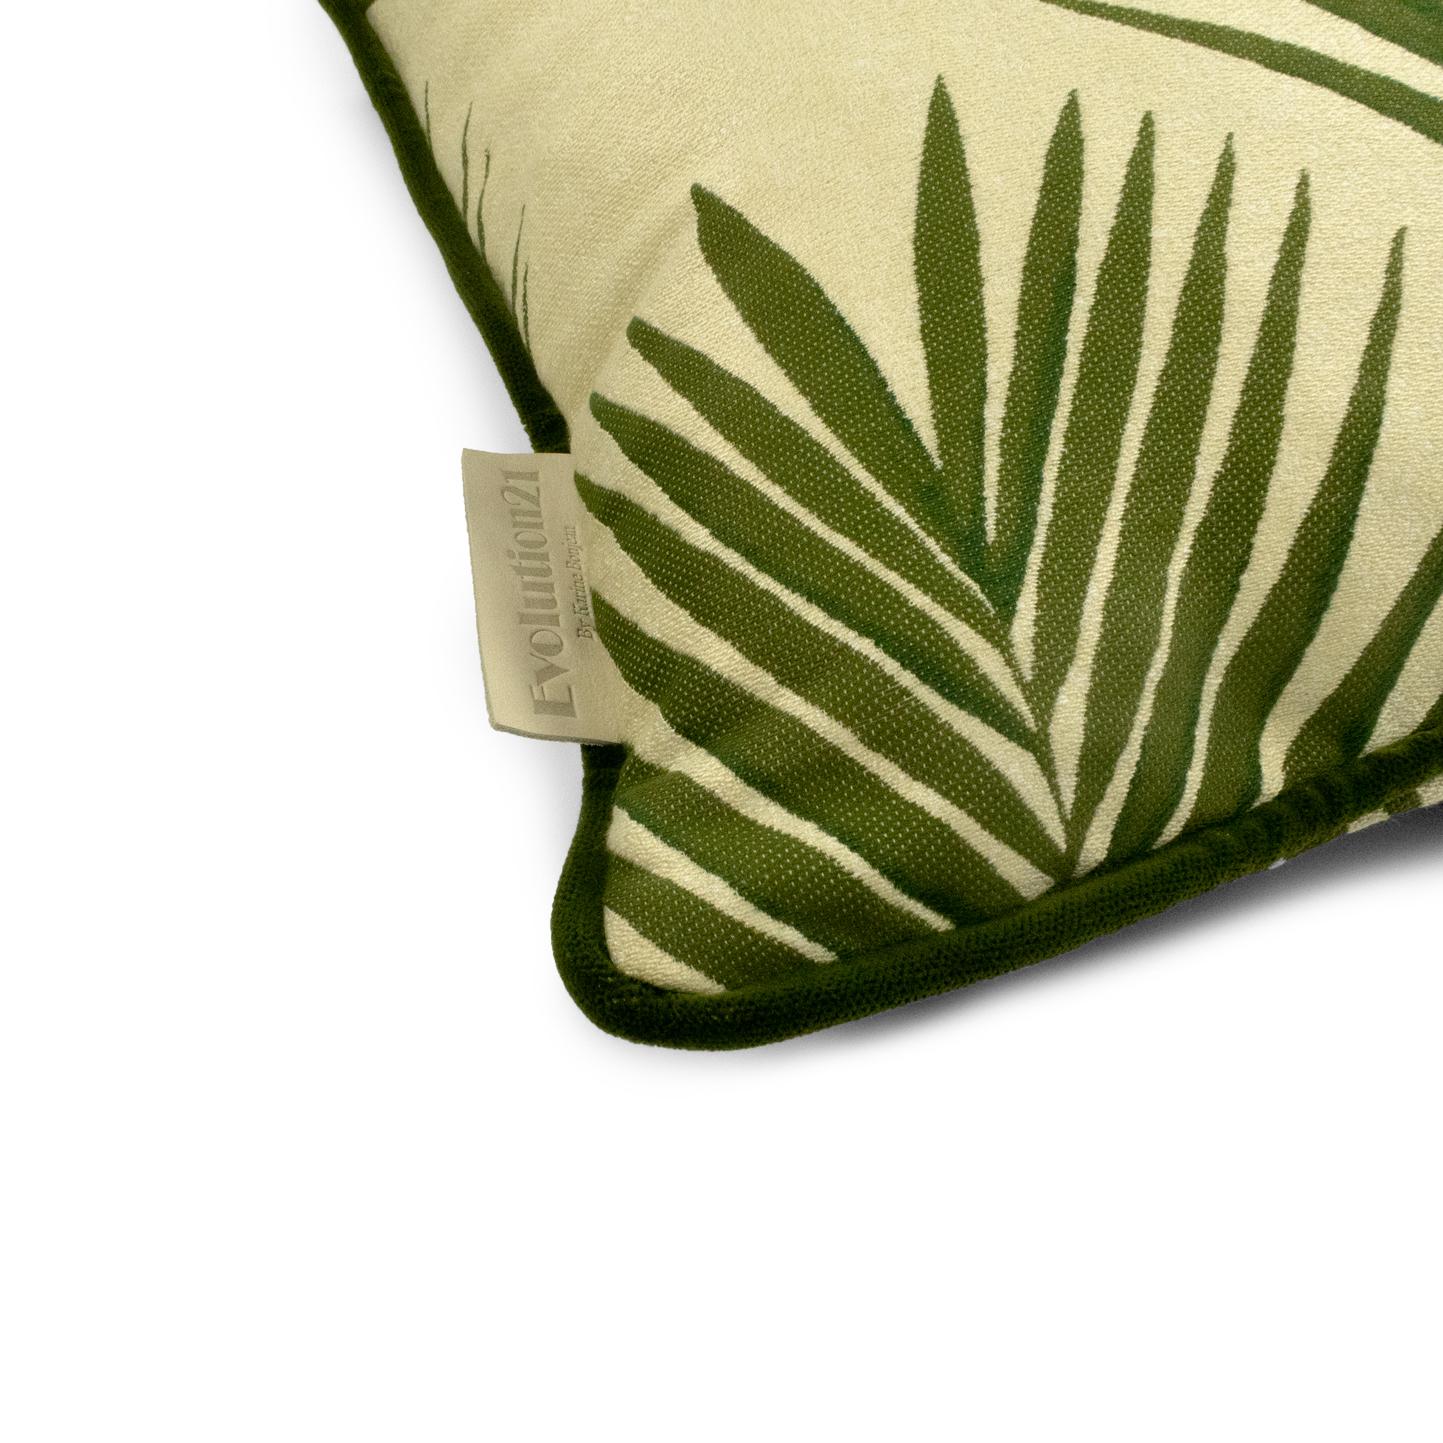 Belgian Cushion / Pillow Patterned Bamboo Leaf Green by Evolution21 For Sale